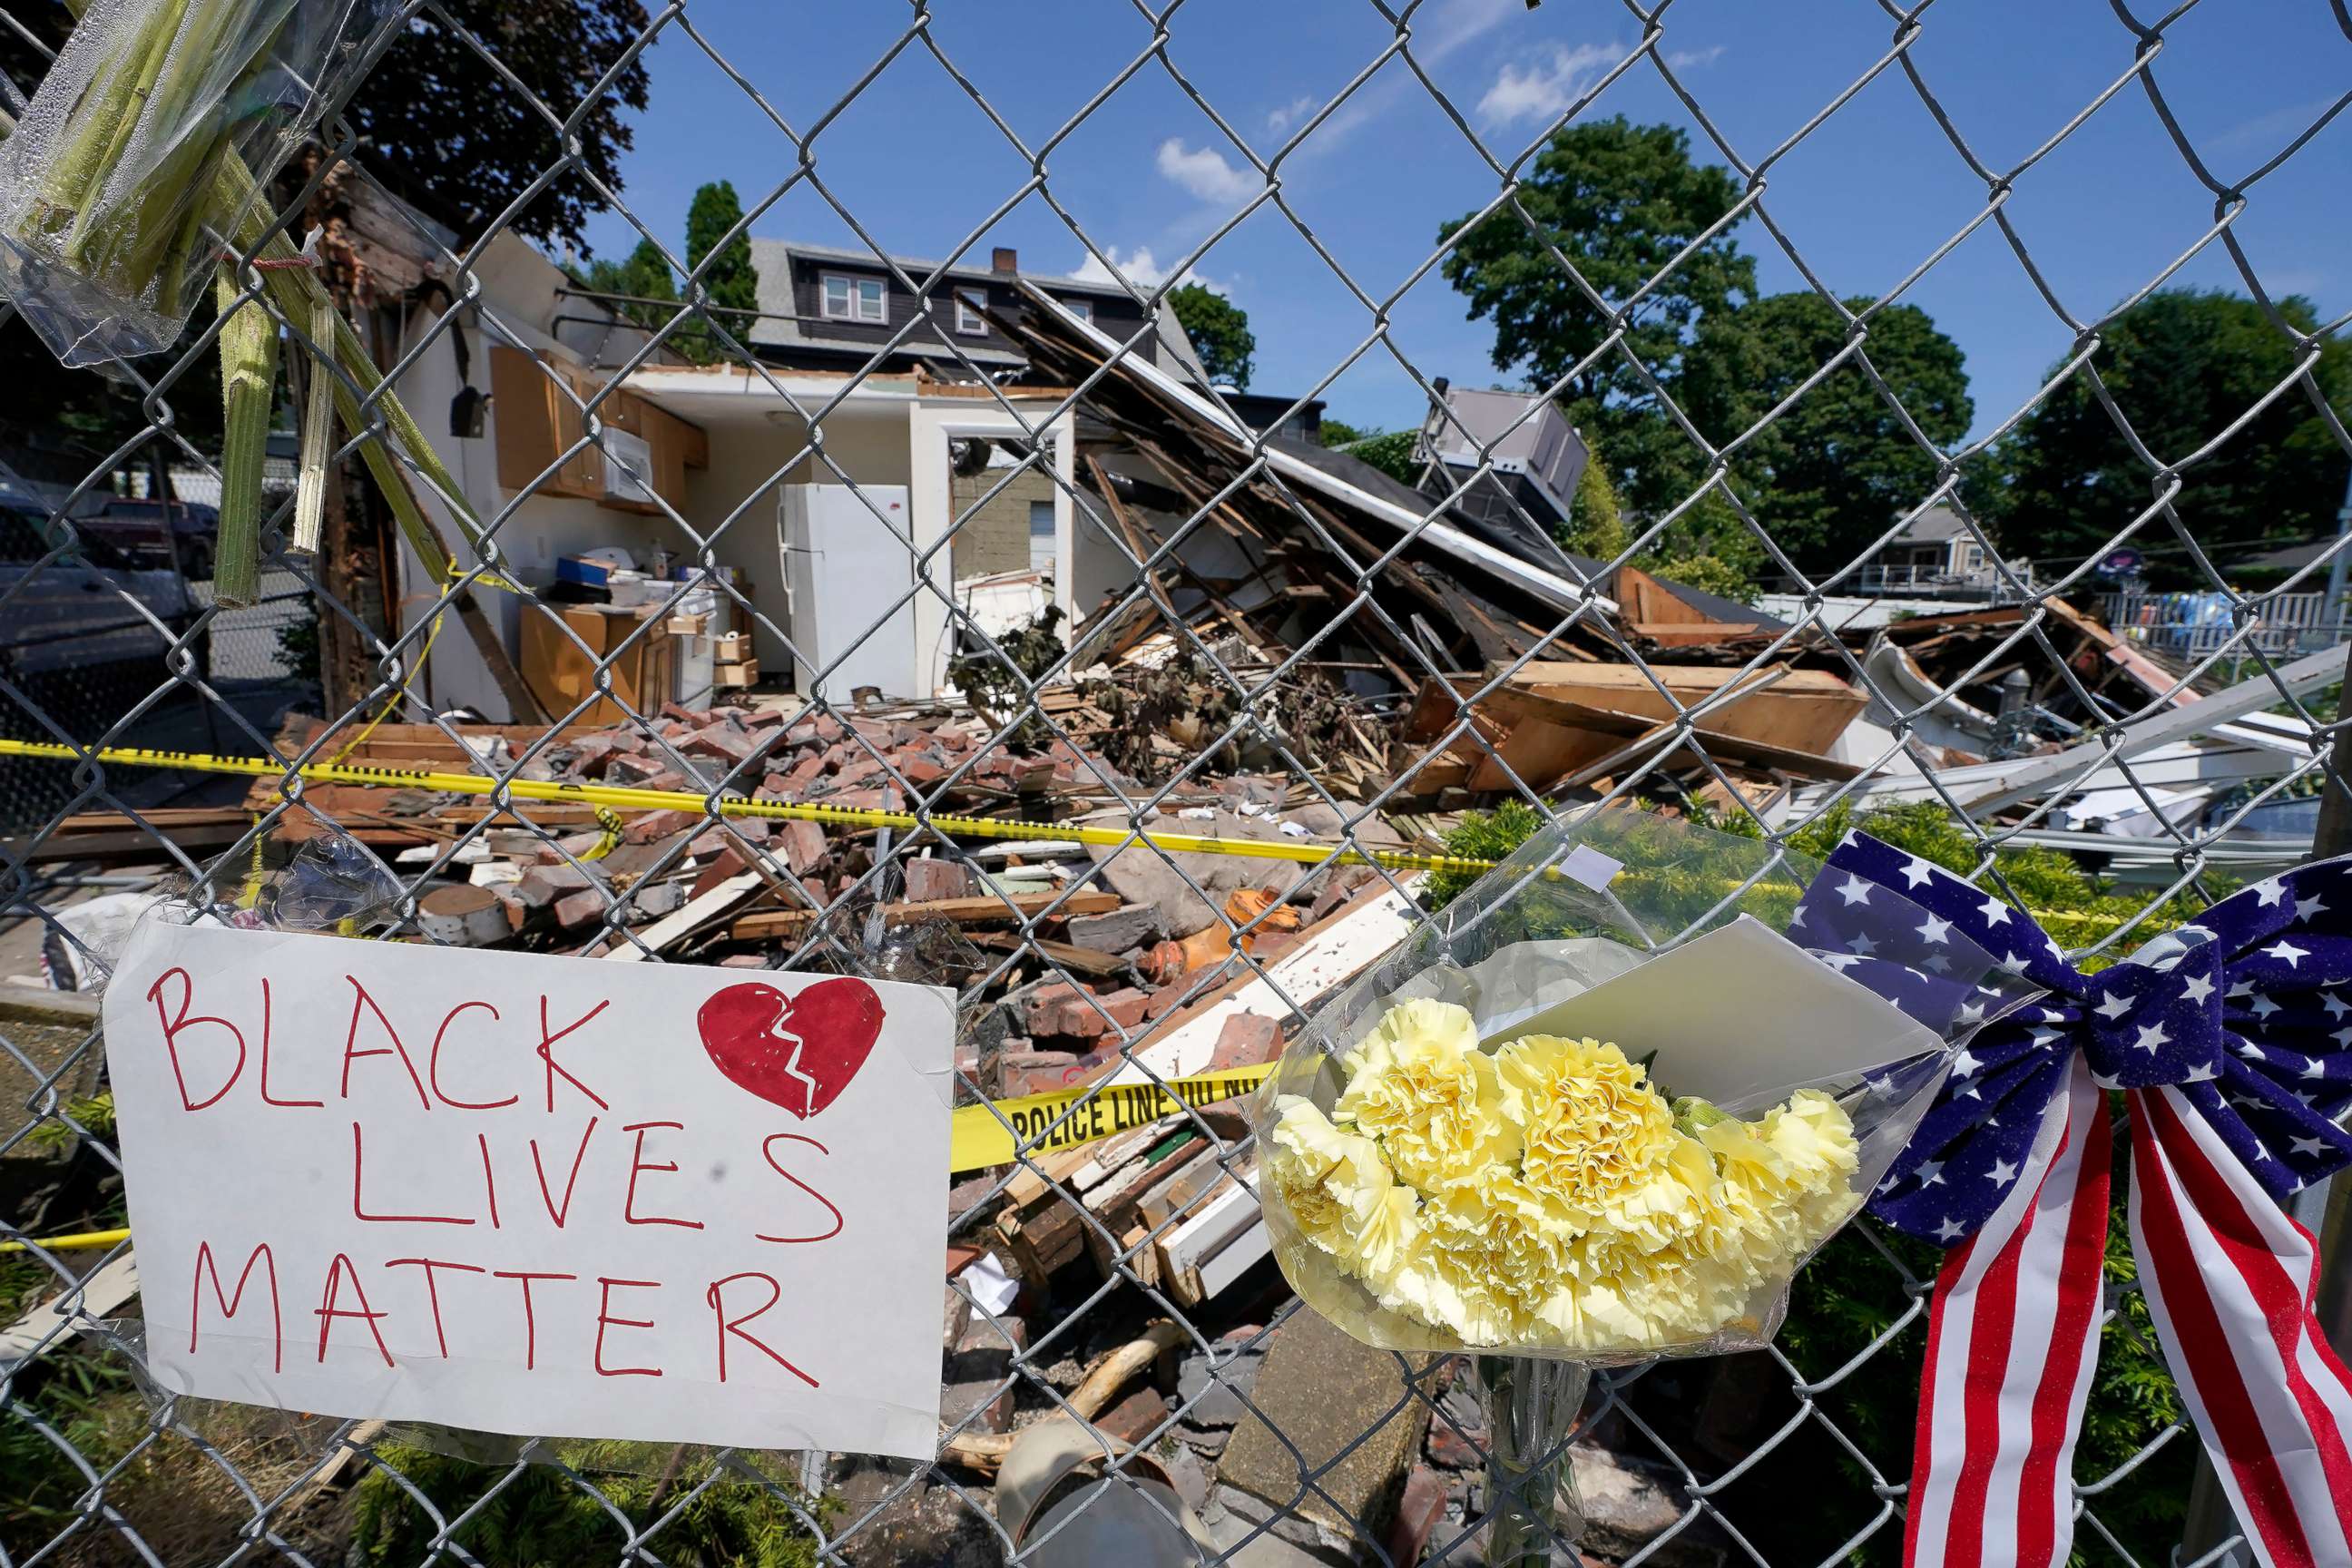 PHOTO: Signs and flowers are attached to a fence outside a building in Winthrop, Mass., June 28, 2021, where an armed man crashed a hijacked truck, on June 26, 2021, then fatally shot two people before being killed by police.